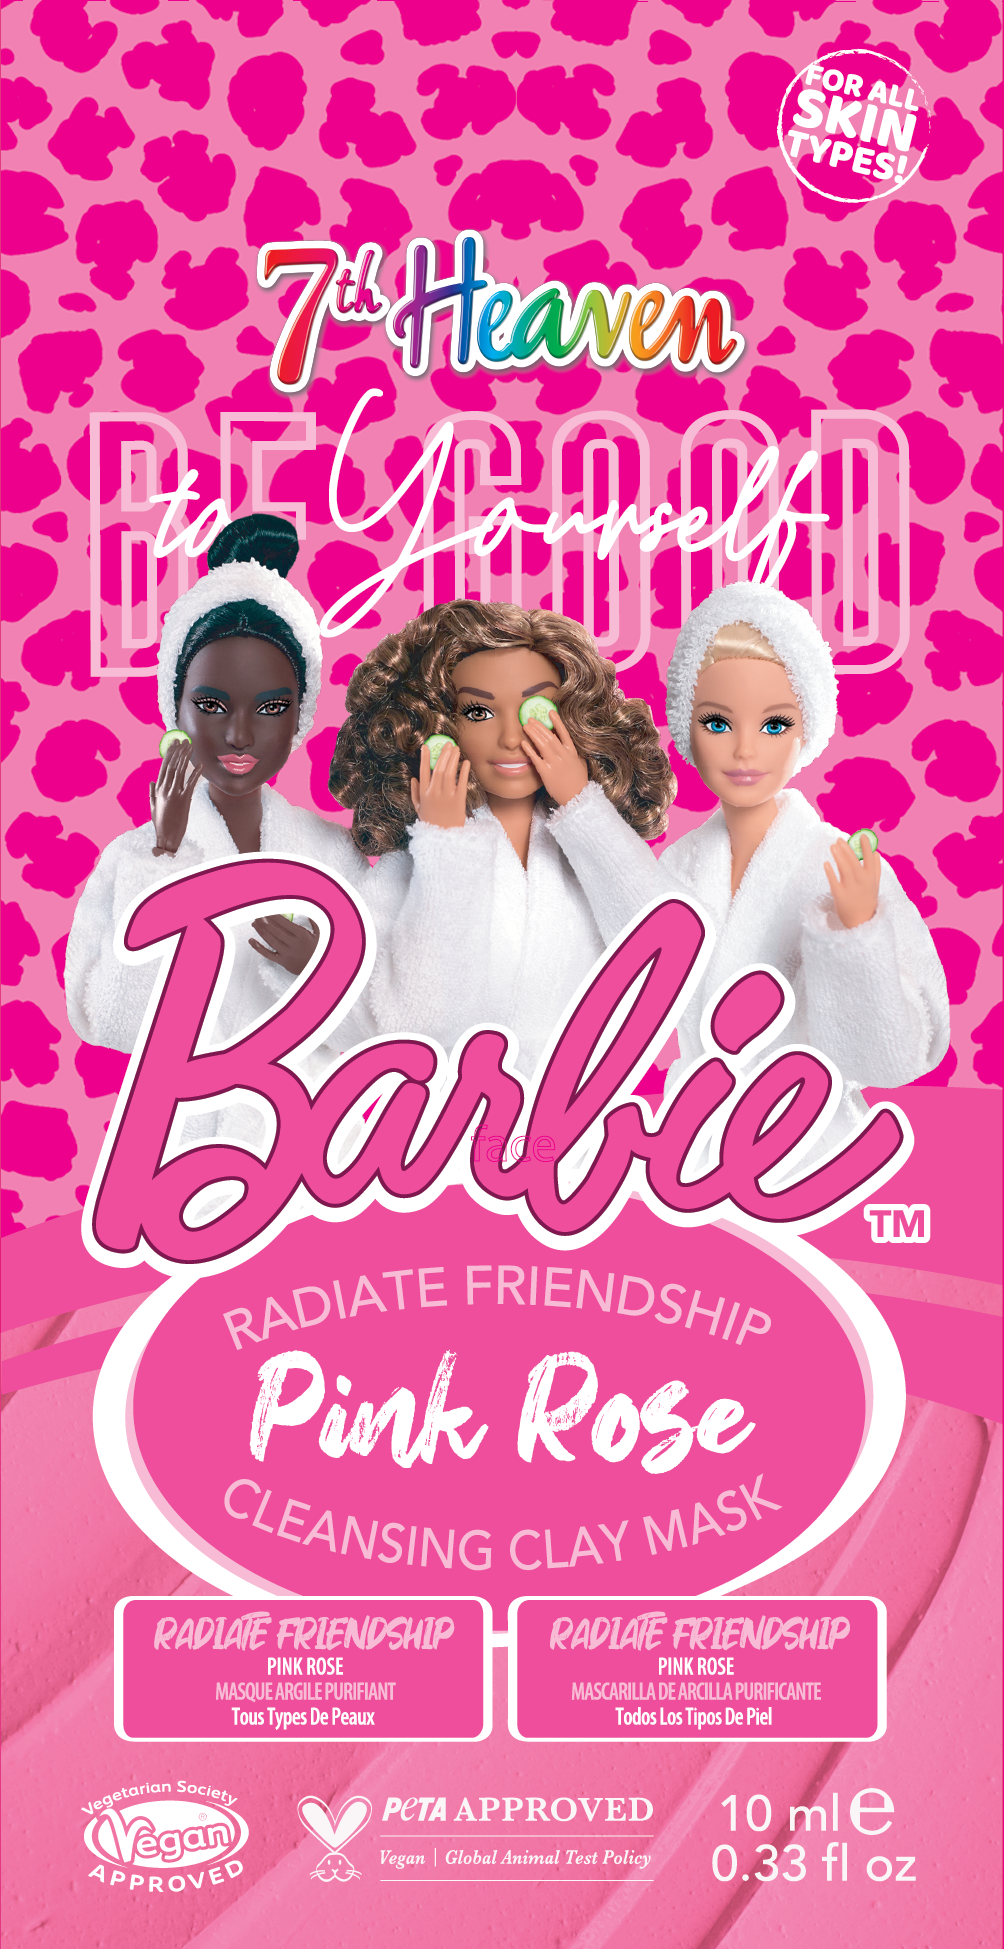 7th Heaven X Barbie 'Strong Girls Make Waves' Vegan Pink Neon Peel Off Face Mask  Suitable for all skin types